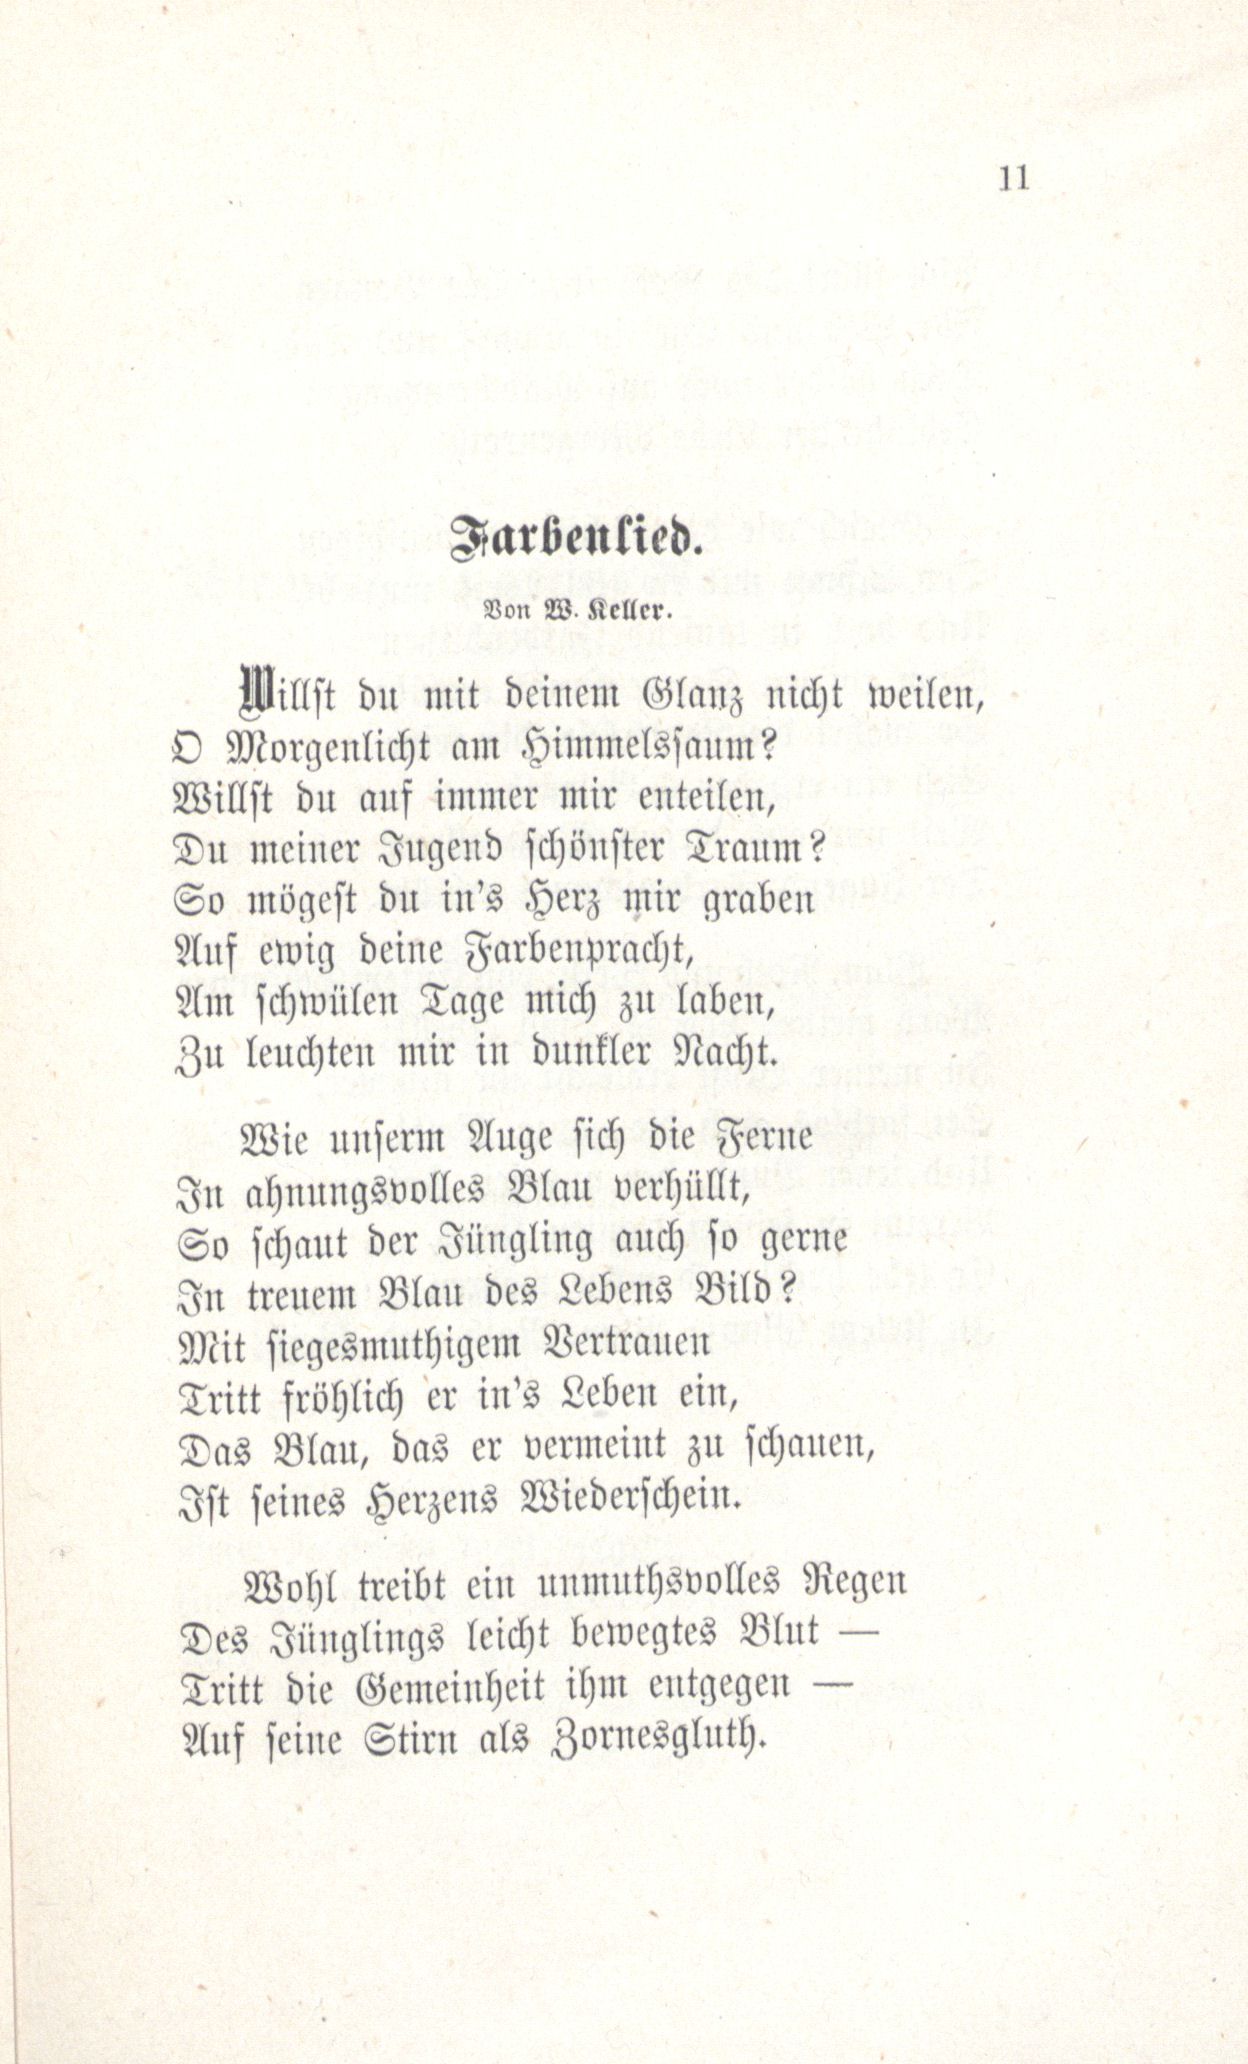 Farbenlied (1880) | 1. (11) Main body of text